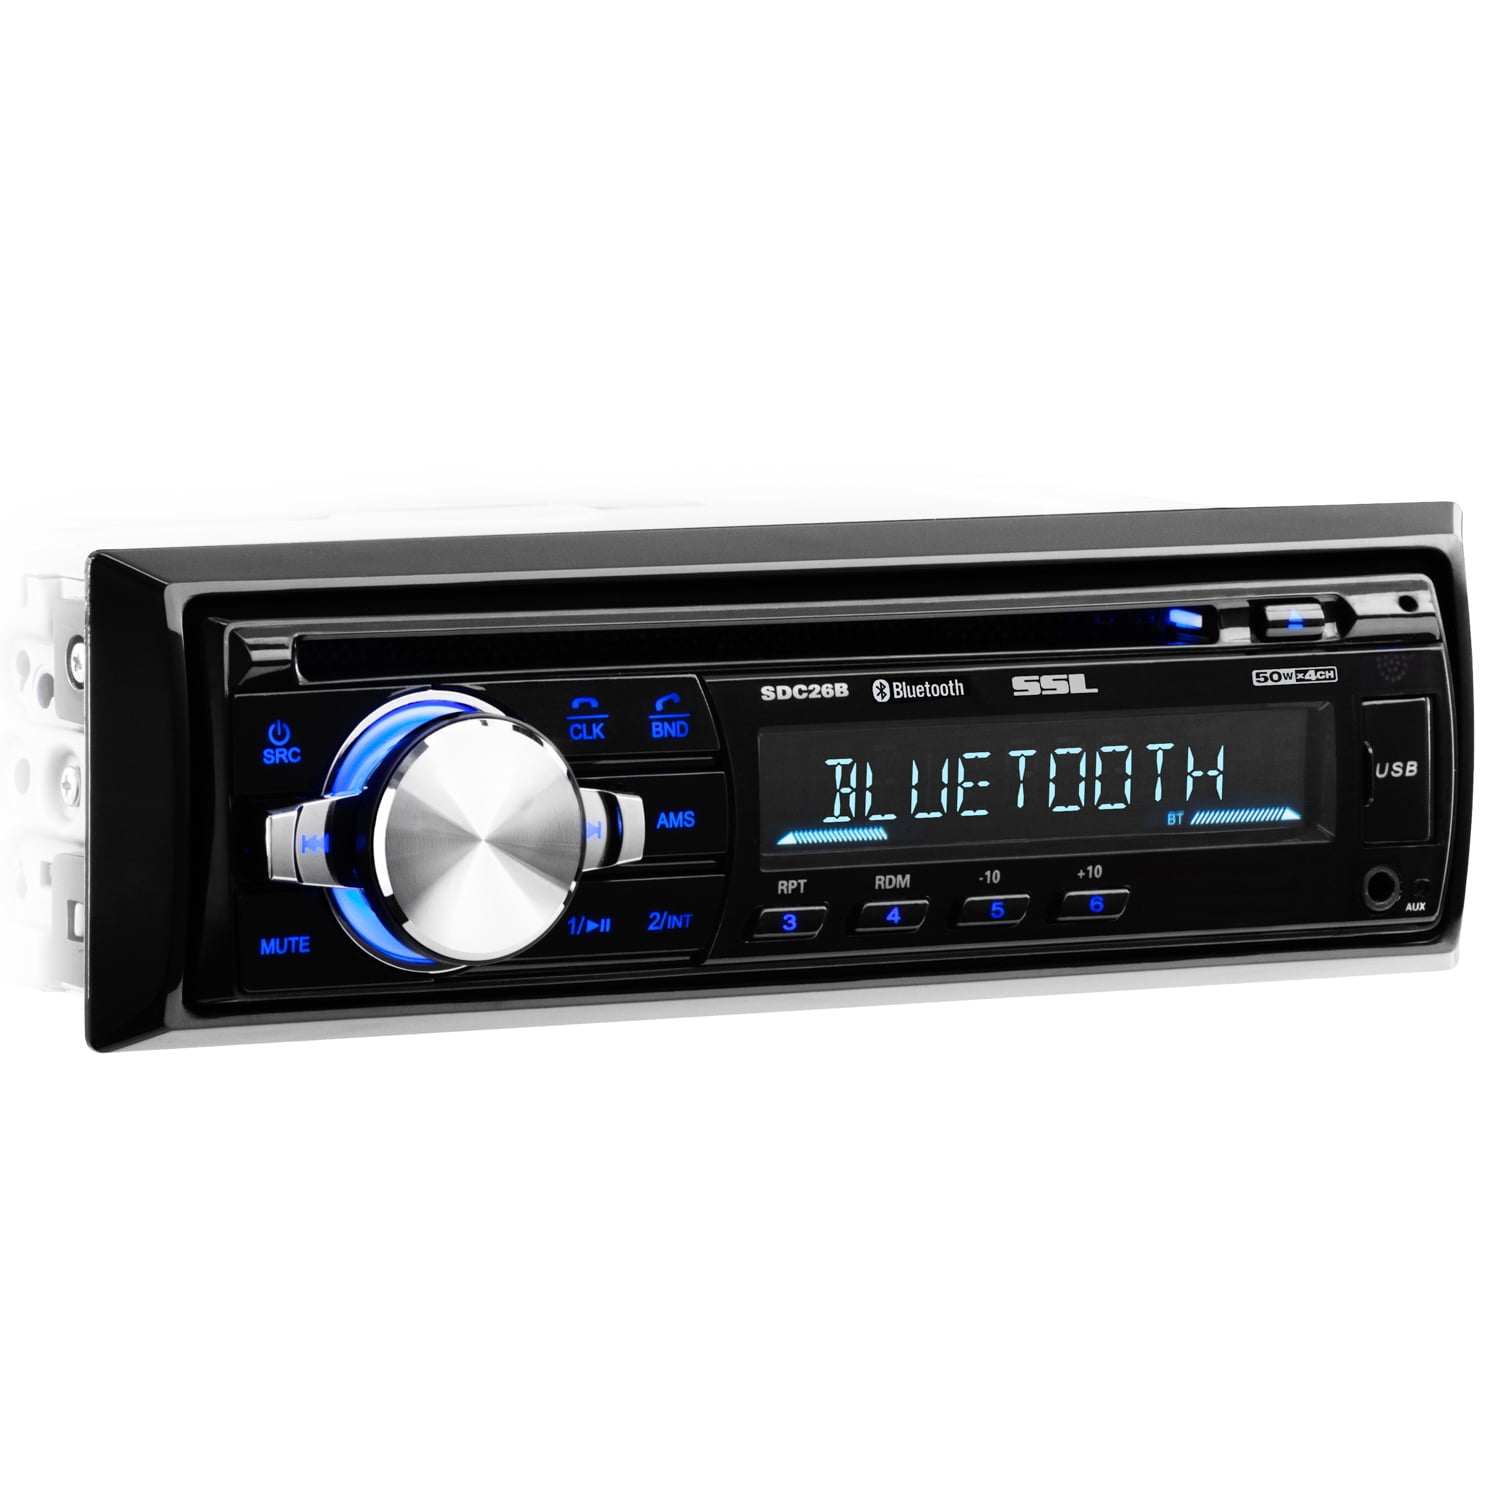 Boss 508UAB 1 Din In Dash CD Car Player USB MP3 Stereo Audio Receiver Bluetooth 